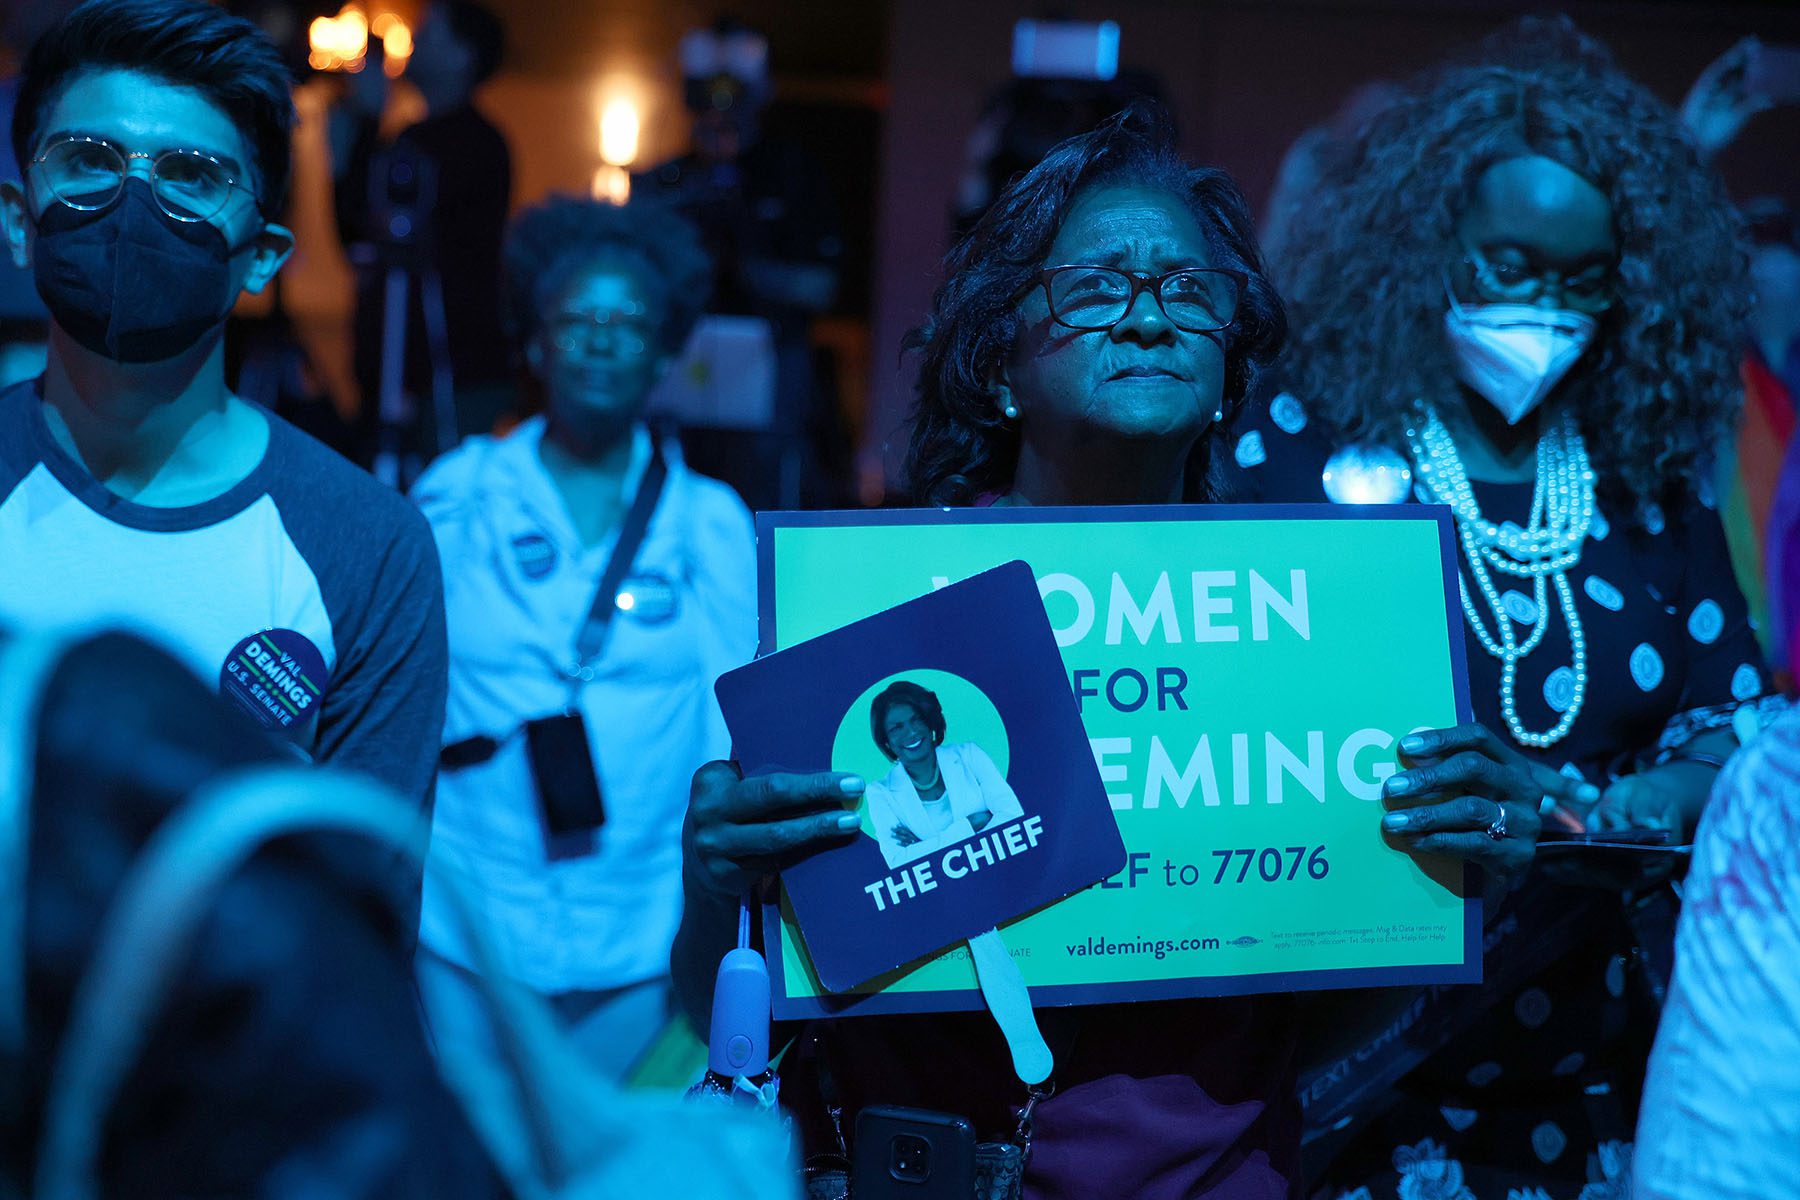 A Demings supporter holds a sign that reads "women for demings" as she listens to speeches at a campaign event.